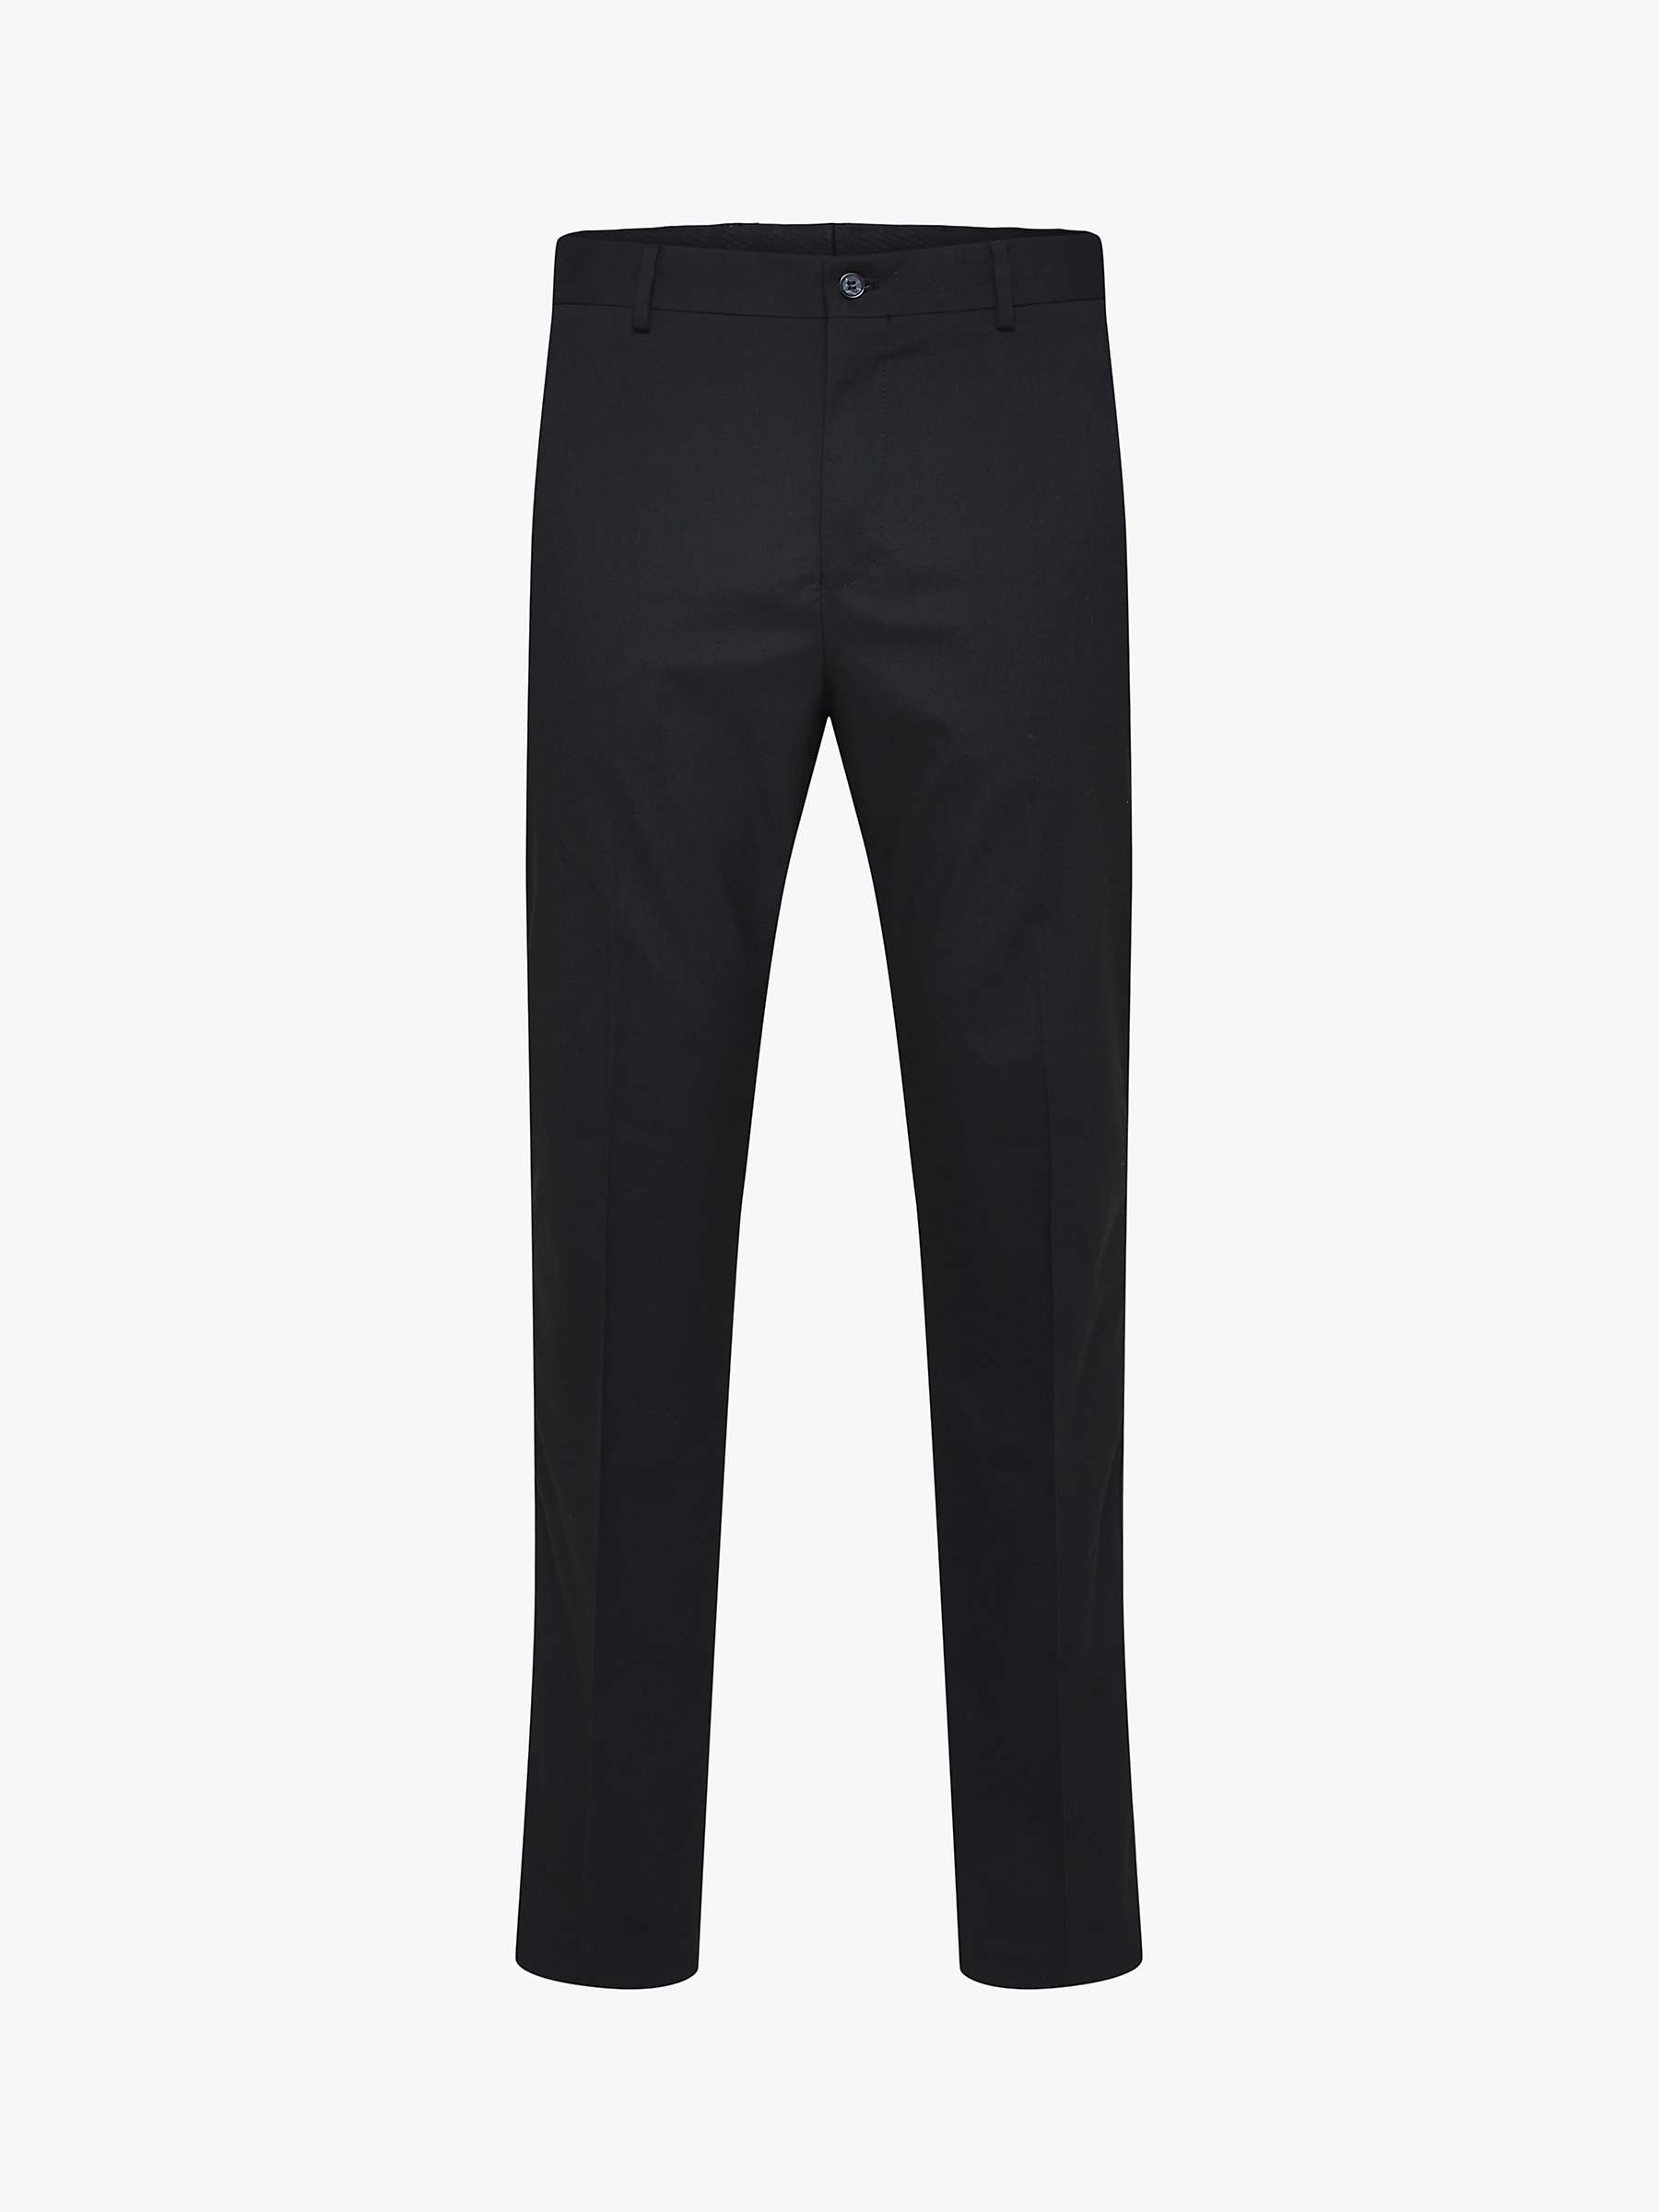 Buy SELECTED HOMME Recycled Polyester Slim Fit Tux Suit Trousers, Black Online at johnlewis.com